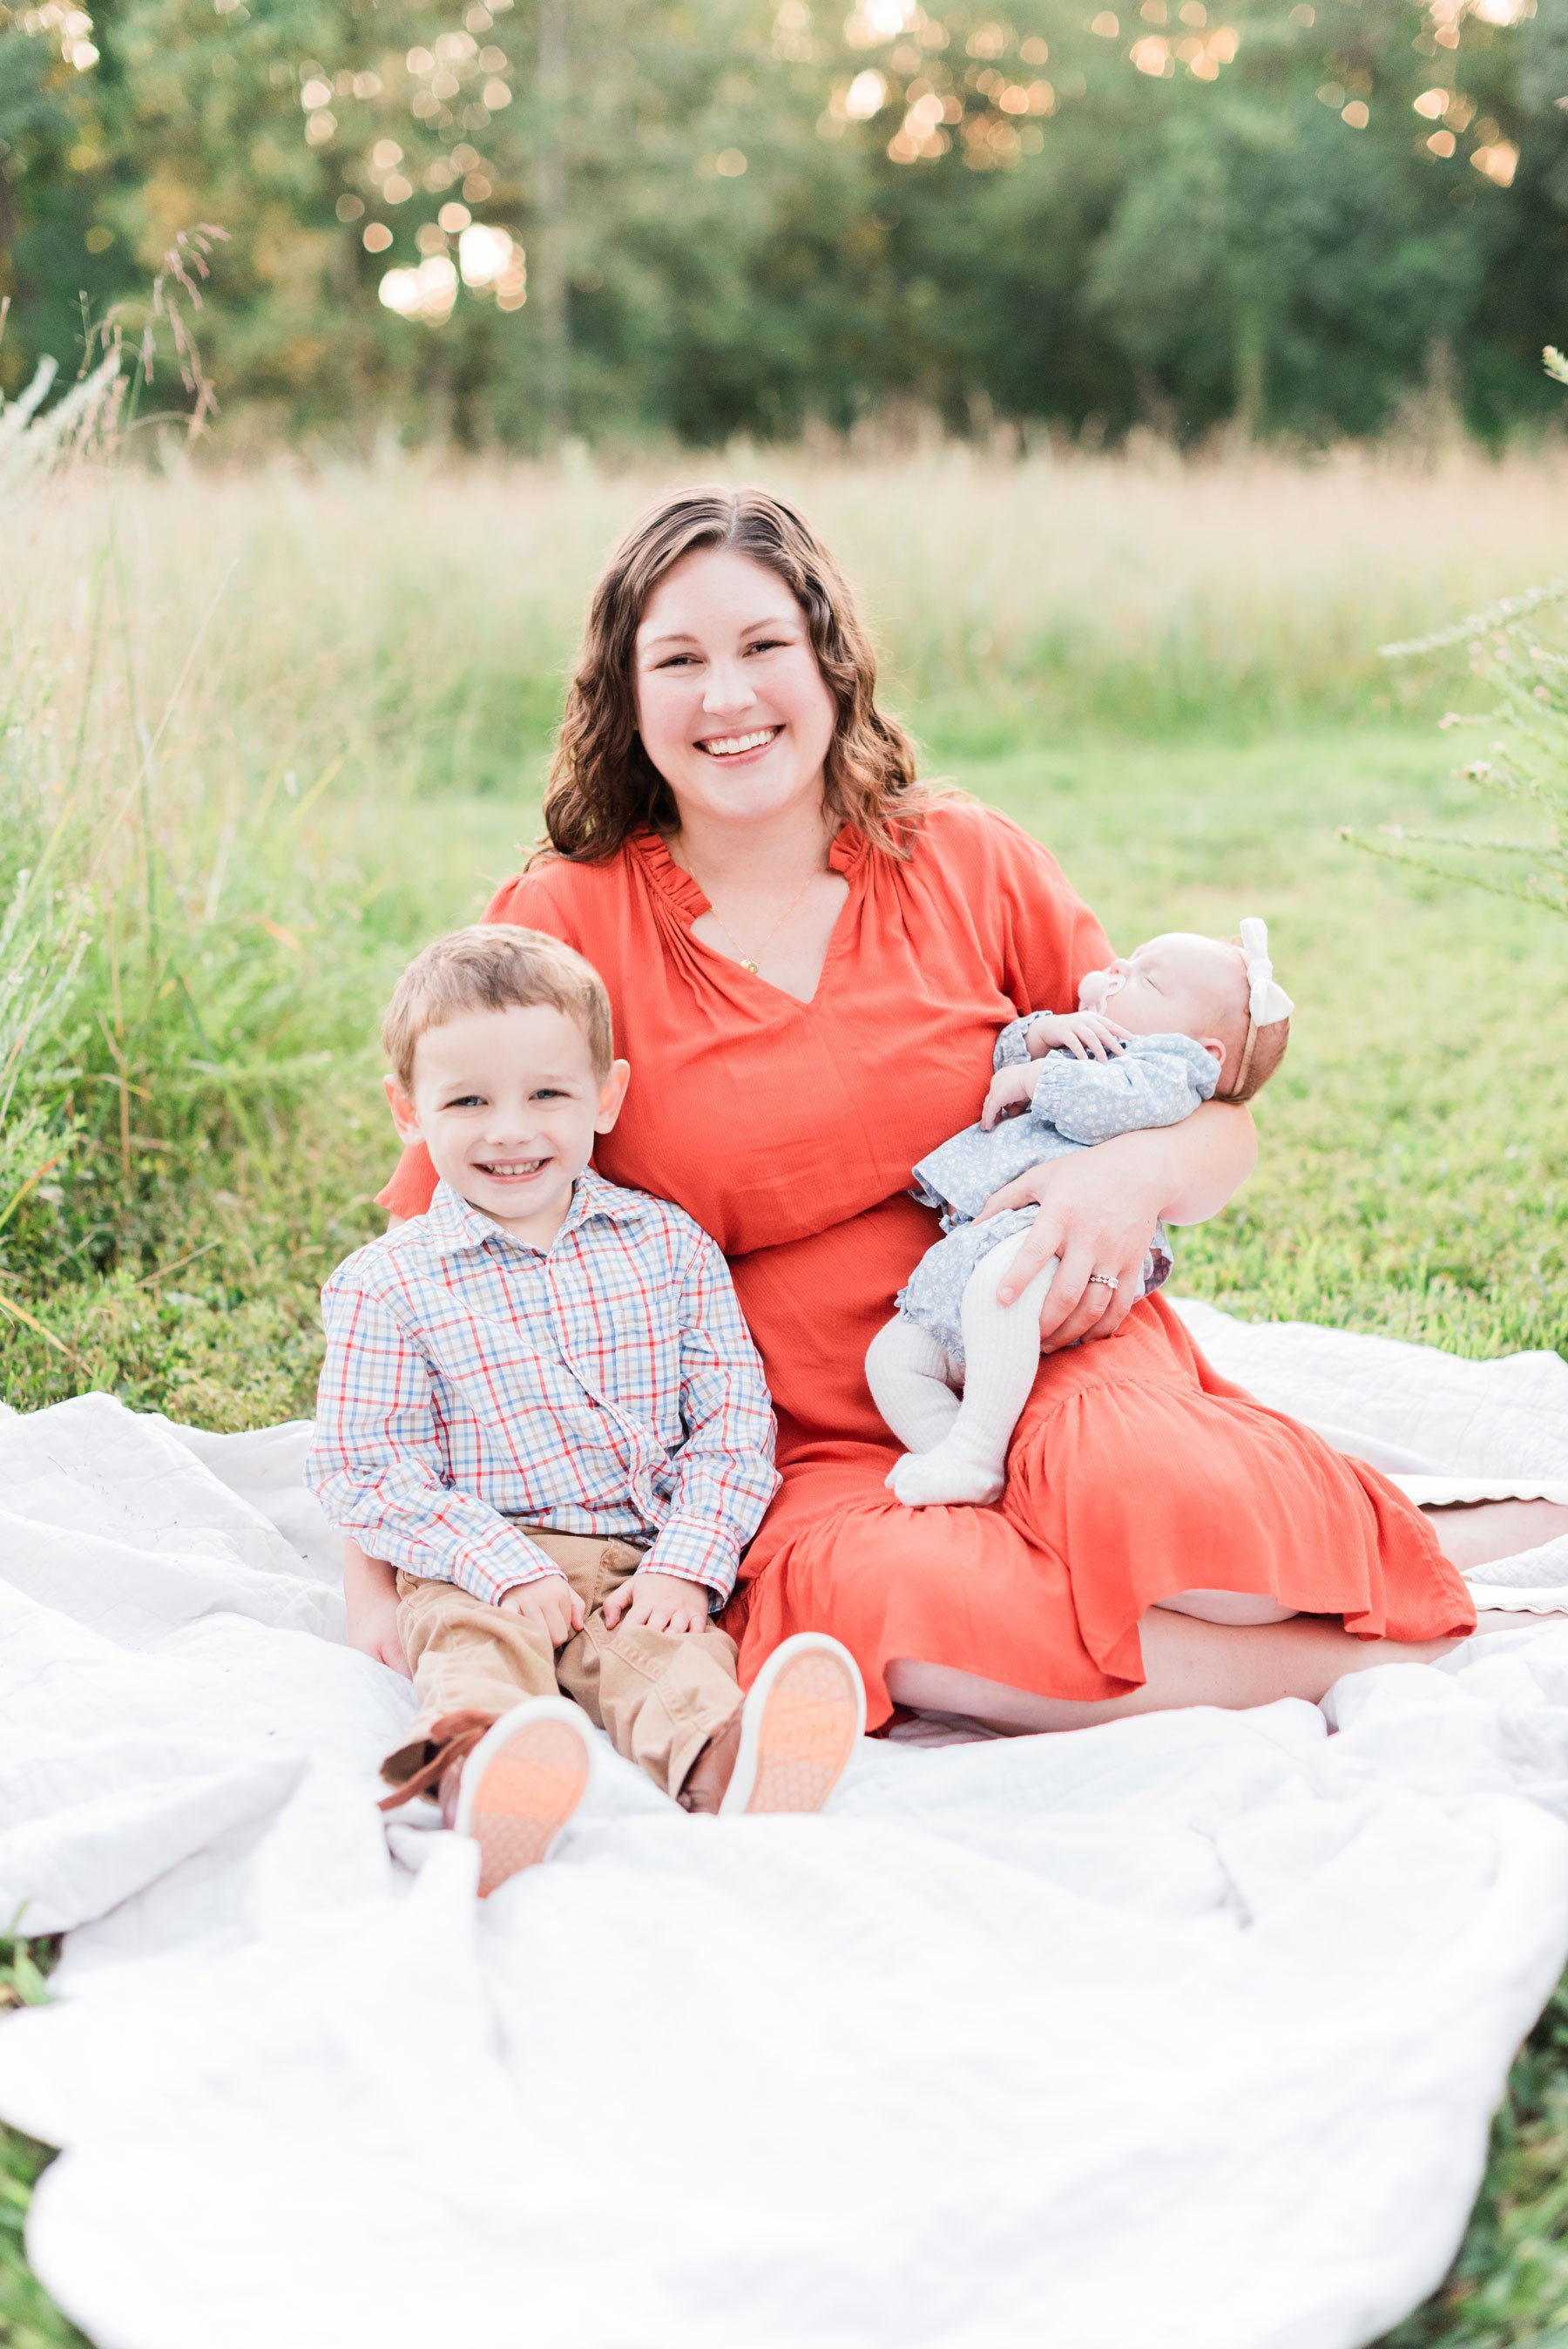    A sweet mom in a red dress poses with her babies during our fall family photo session. #marylandfamilyphotographer #findingafamilyphotographer #familyphotooutfits #semiformalphotooutfits #outdoorfamilysession #photoswithkids #georgiafamilyphotos #